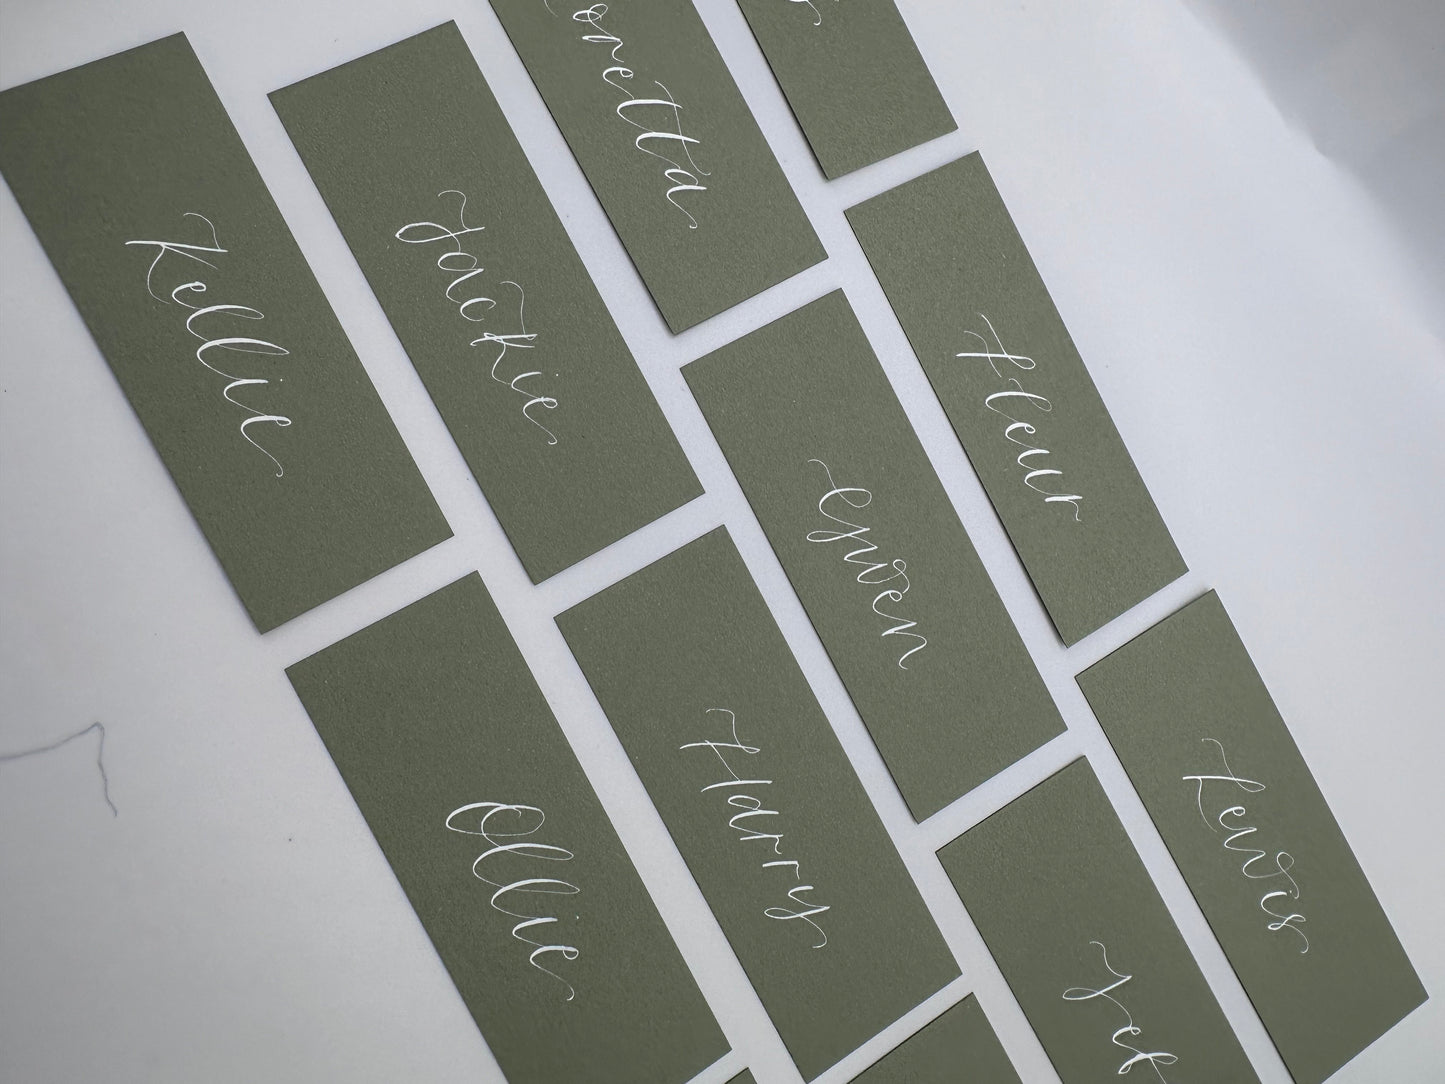 Calligraphy Wedding Place Name Card | Eucalyptus Card with Hand Written Calligraphy optional gold or silver eyelet